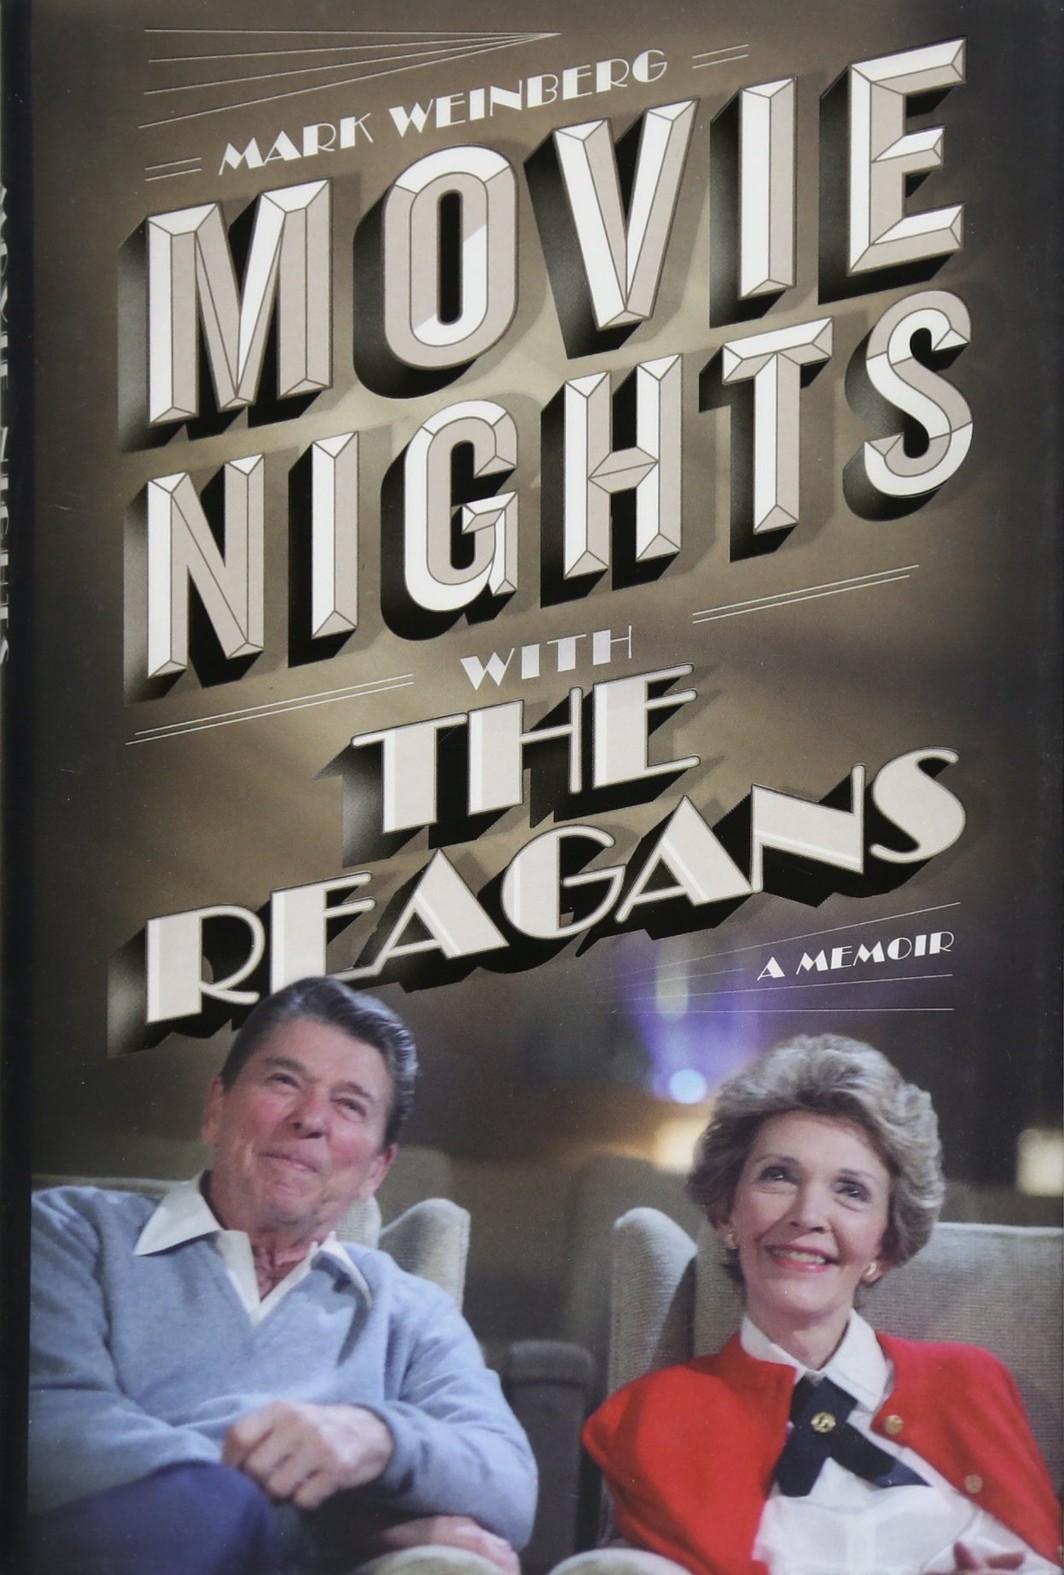 The cover of Movie Nights with the Reagans